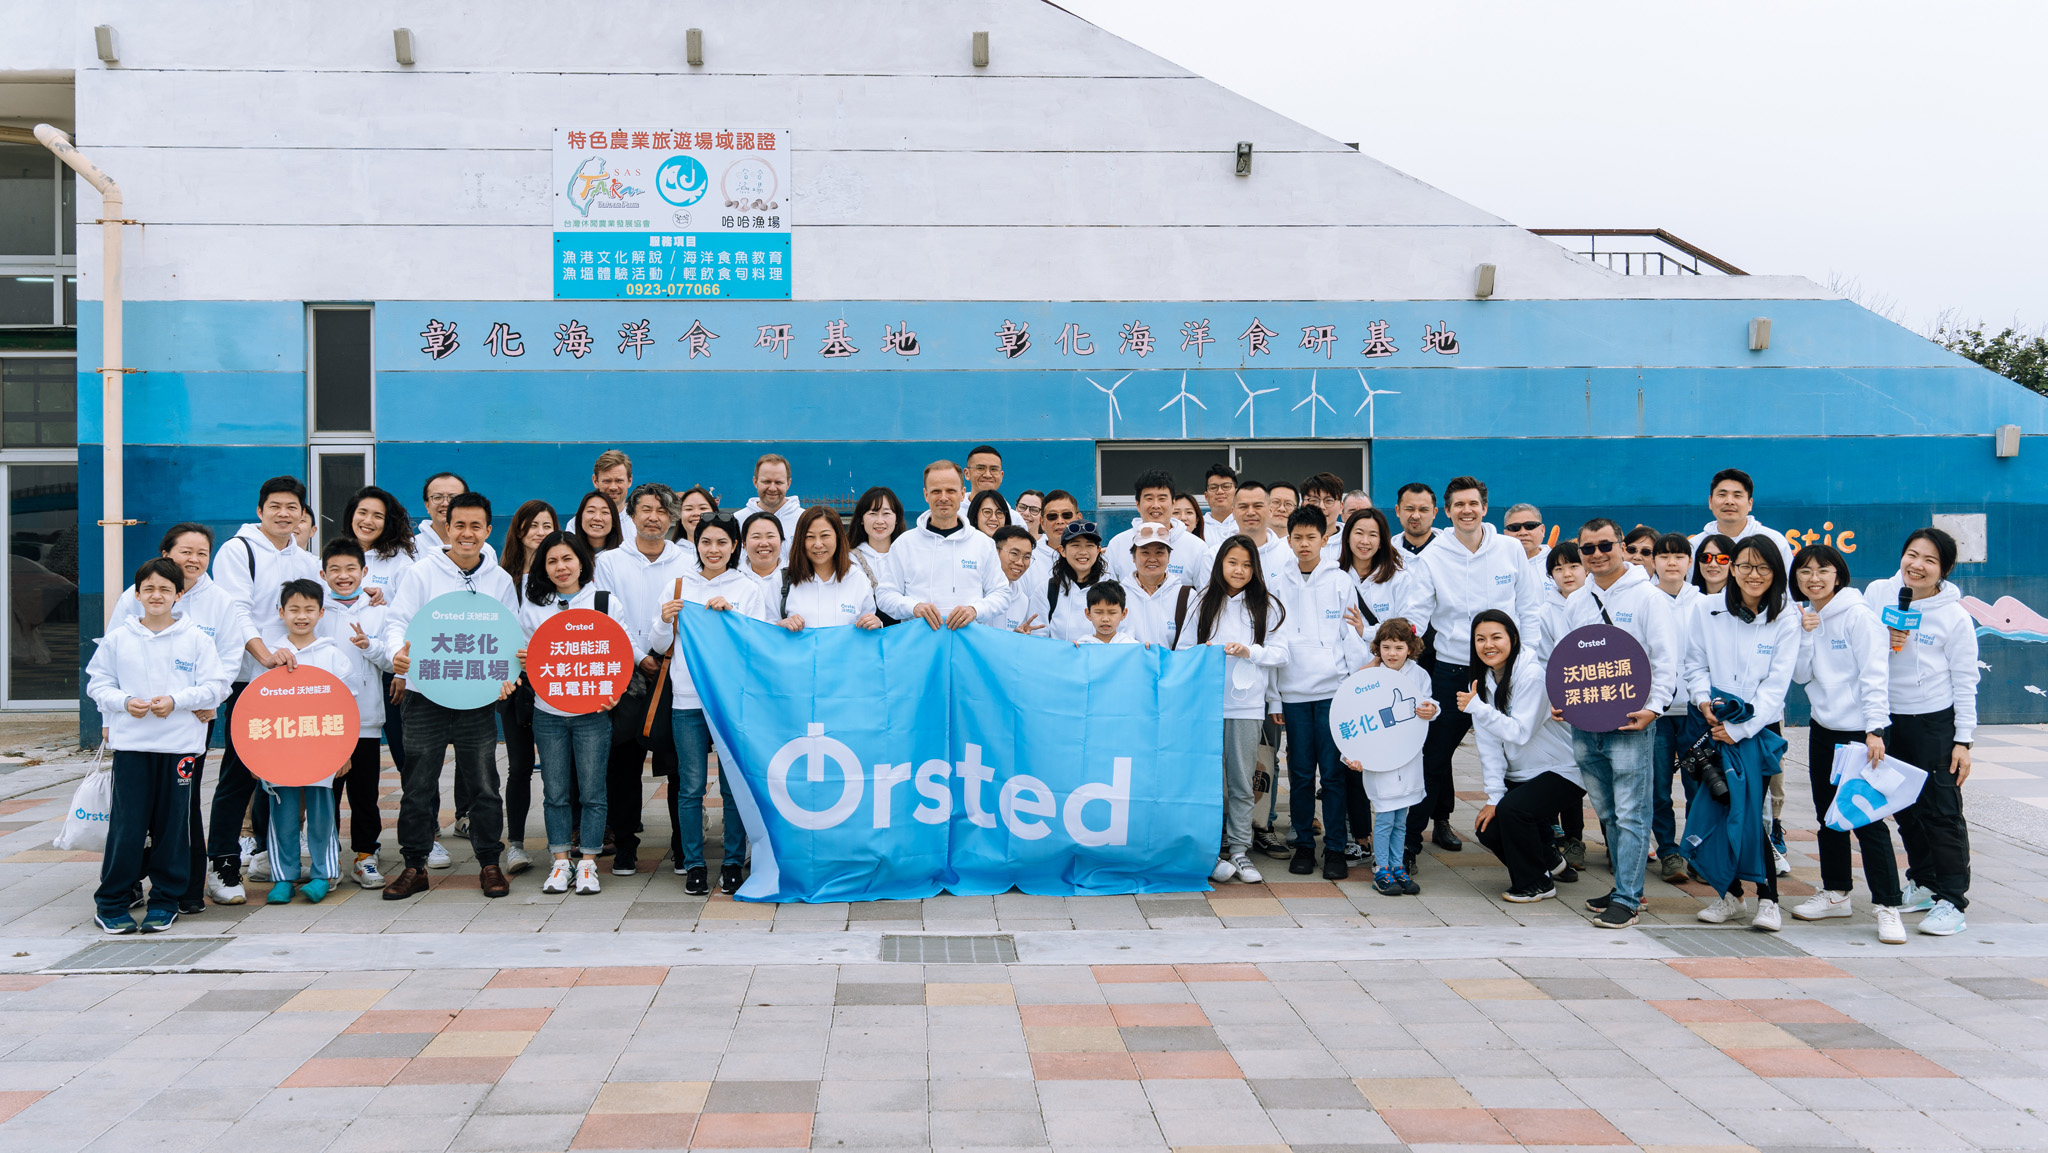 Ørsted Taiwan provides 20 weeks of fully paid leave for employees as primary caregiver for their new-born babies regardless of gender, location, and type of work.